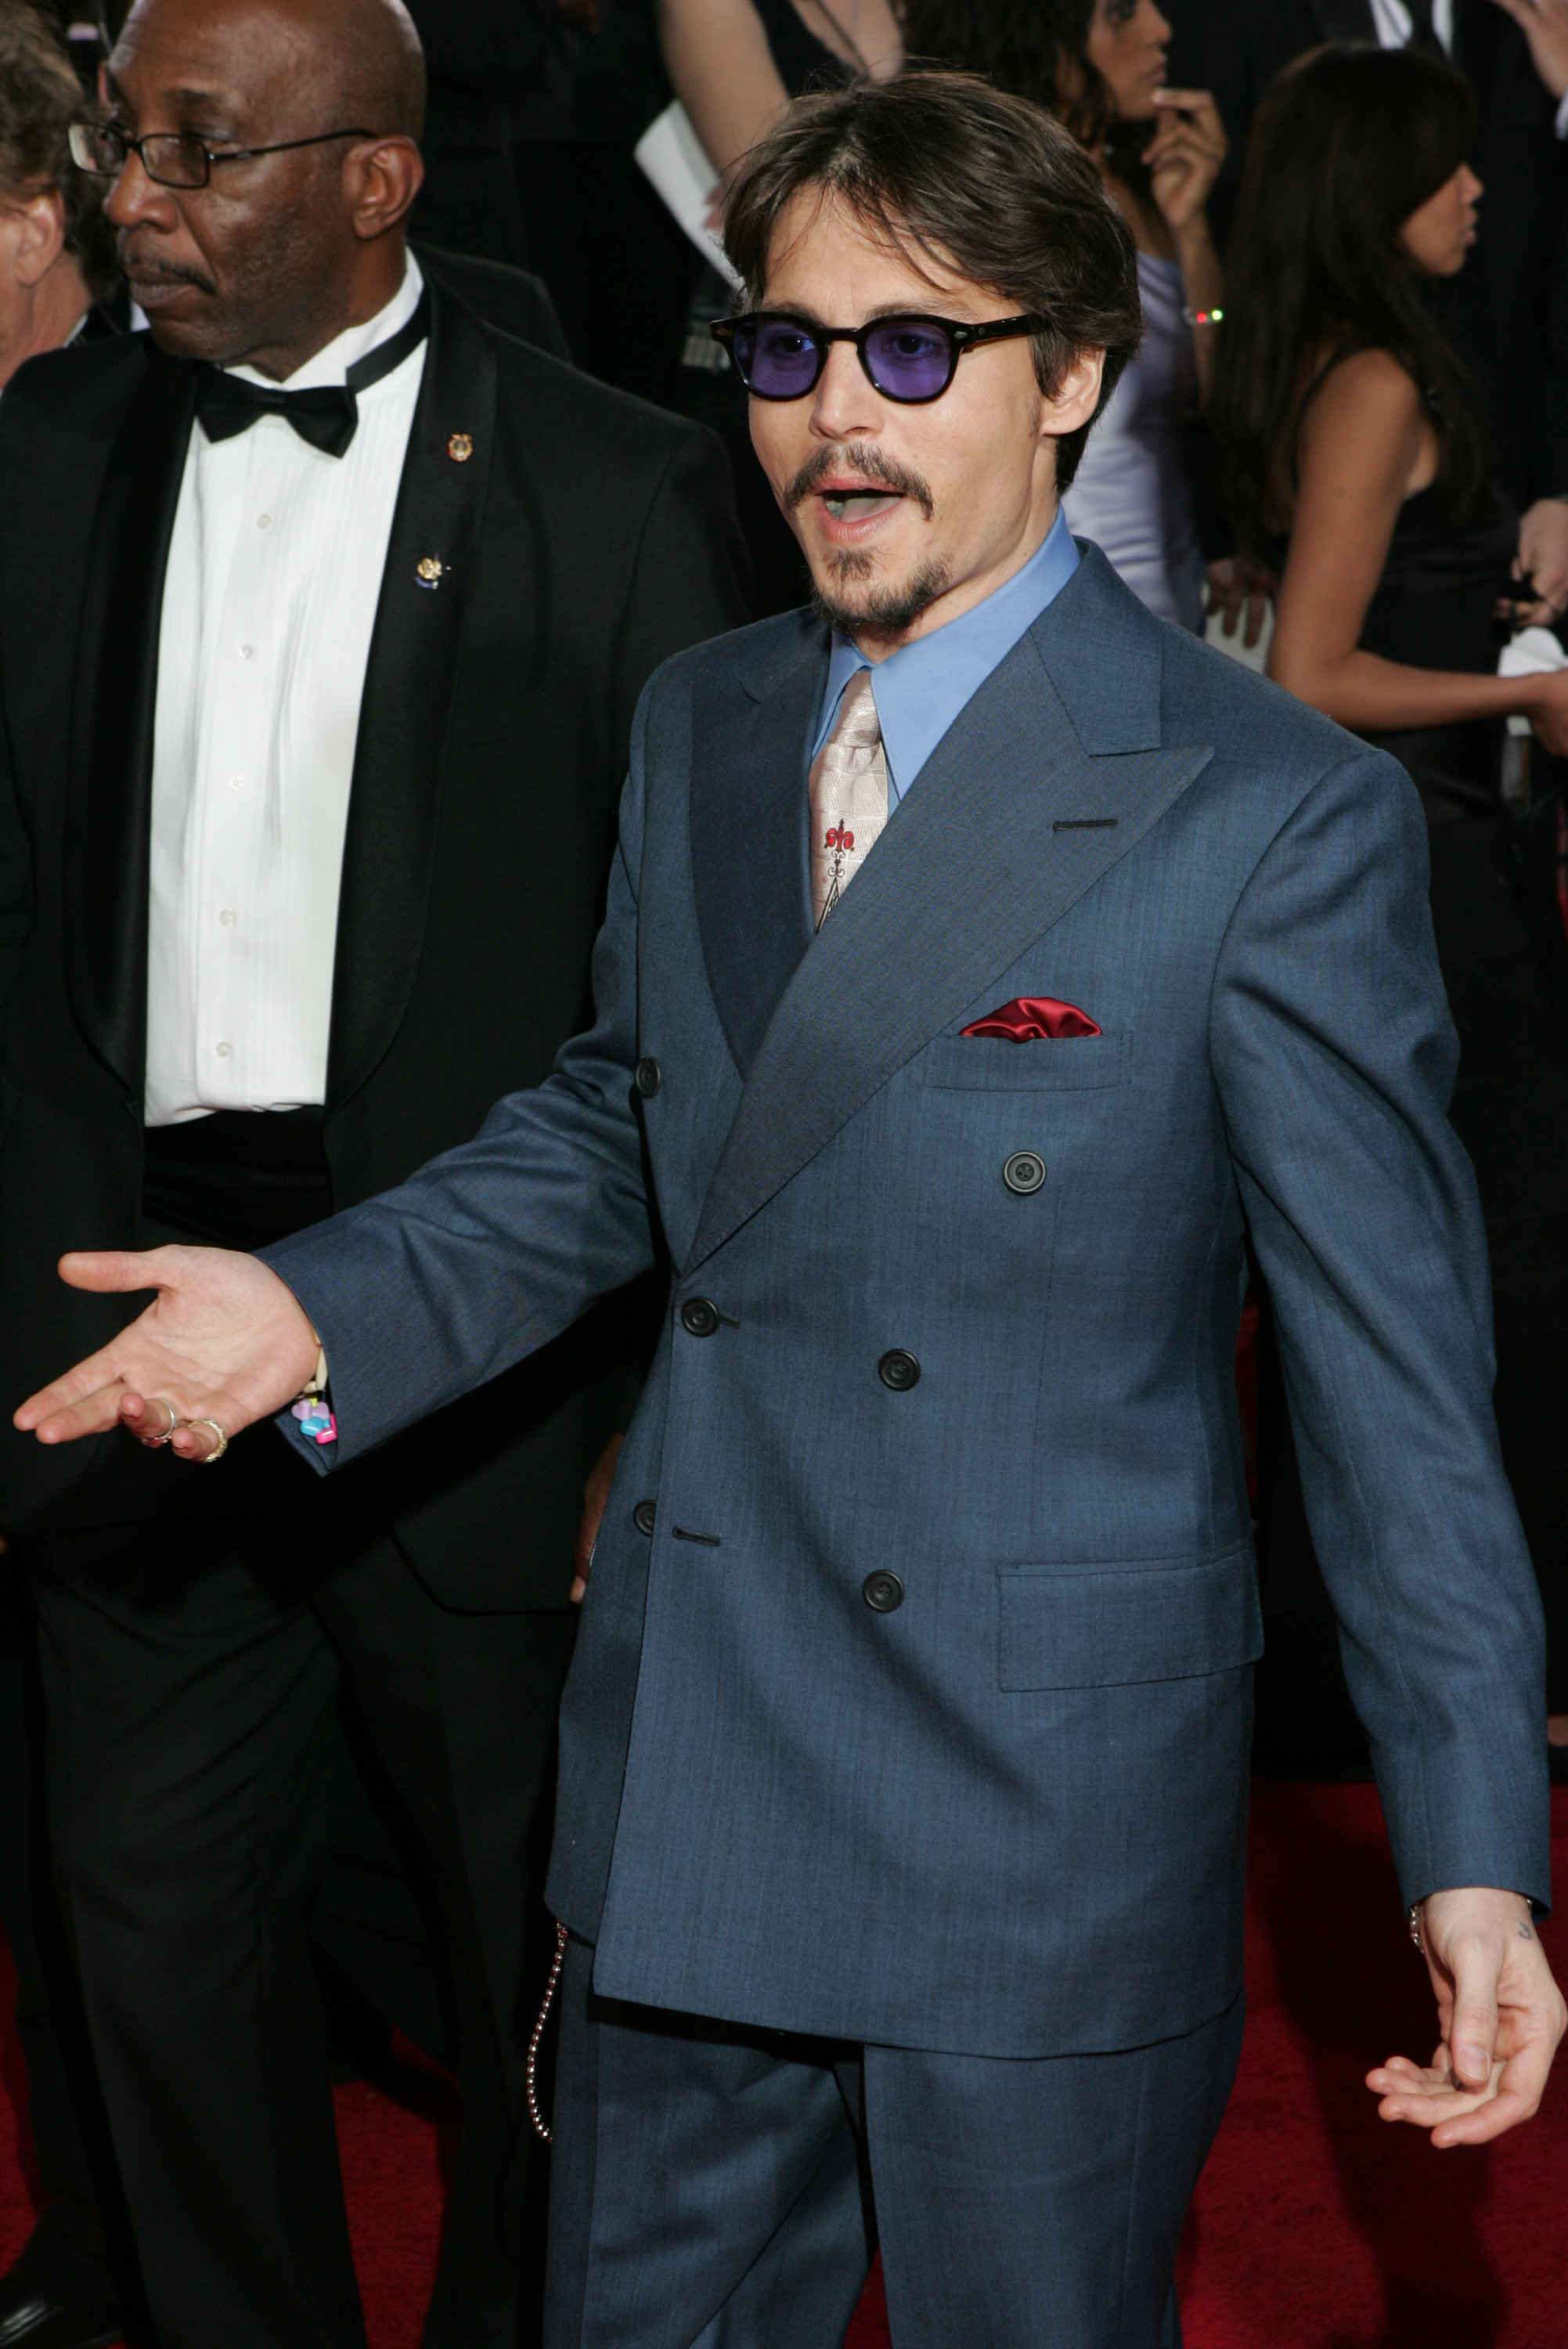 Johnny Depp at the 62nd Annual Golden Globe Awards in Beverly Hills, California on January 16, 2005 | Source: Getty Images